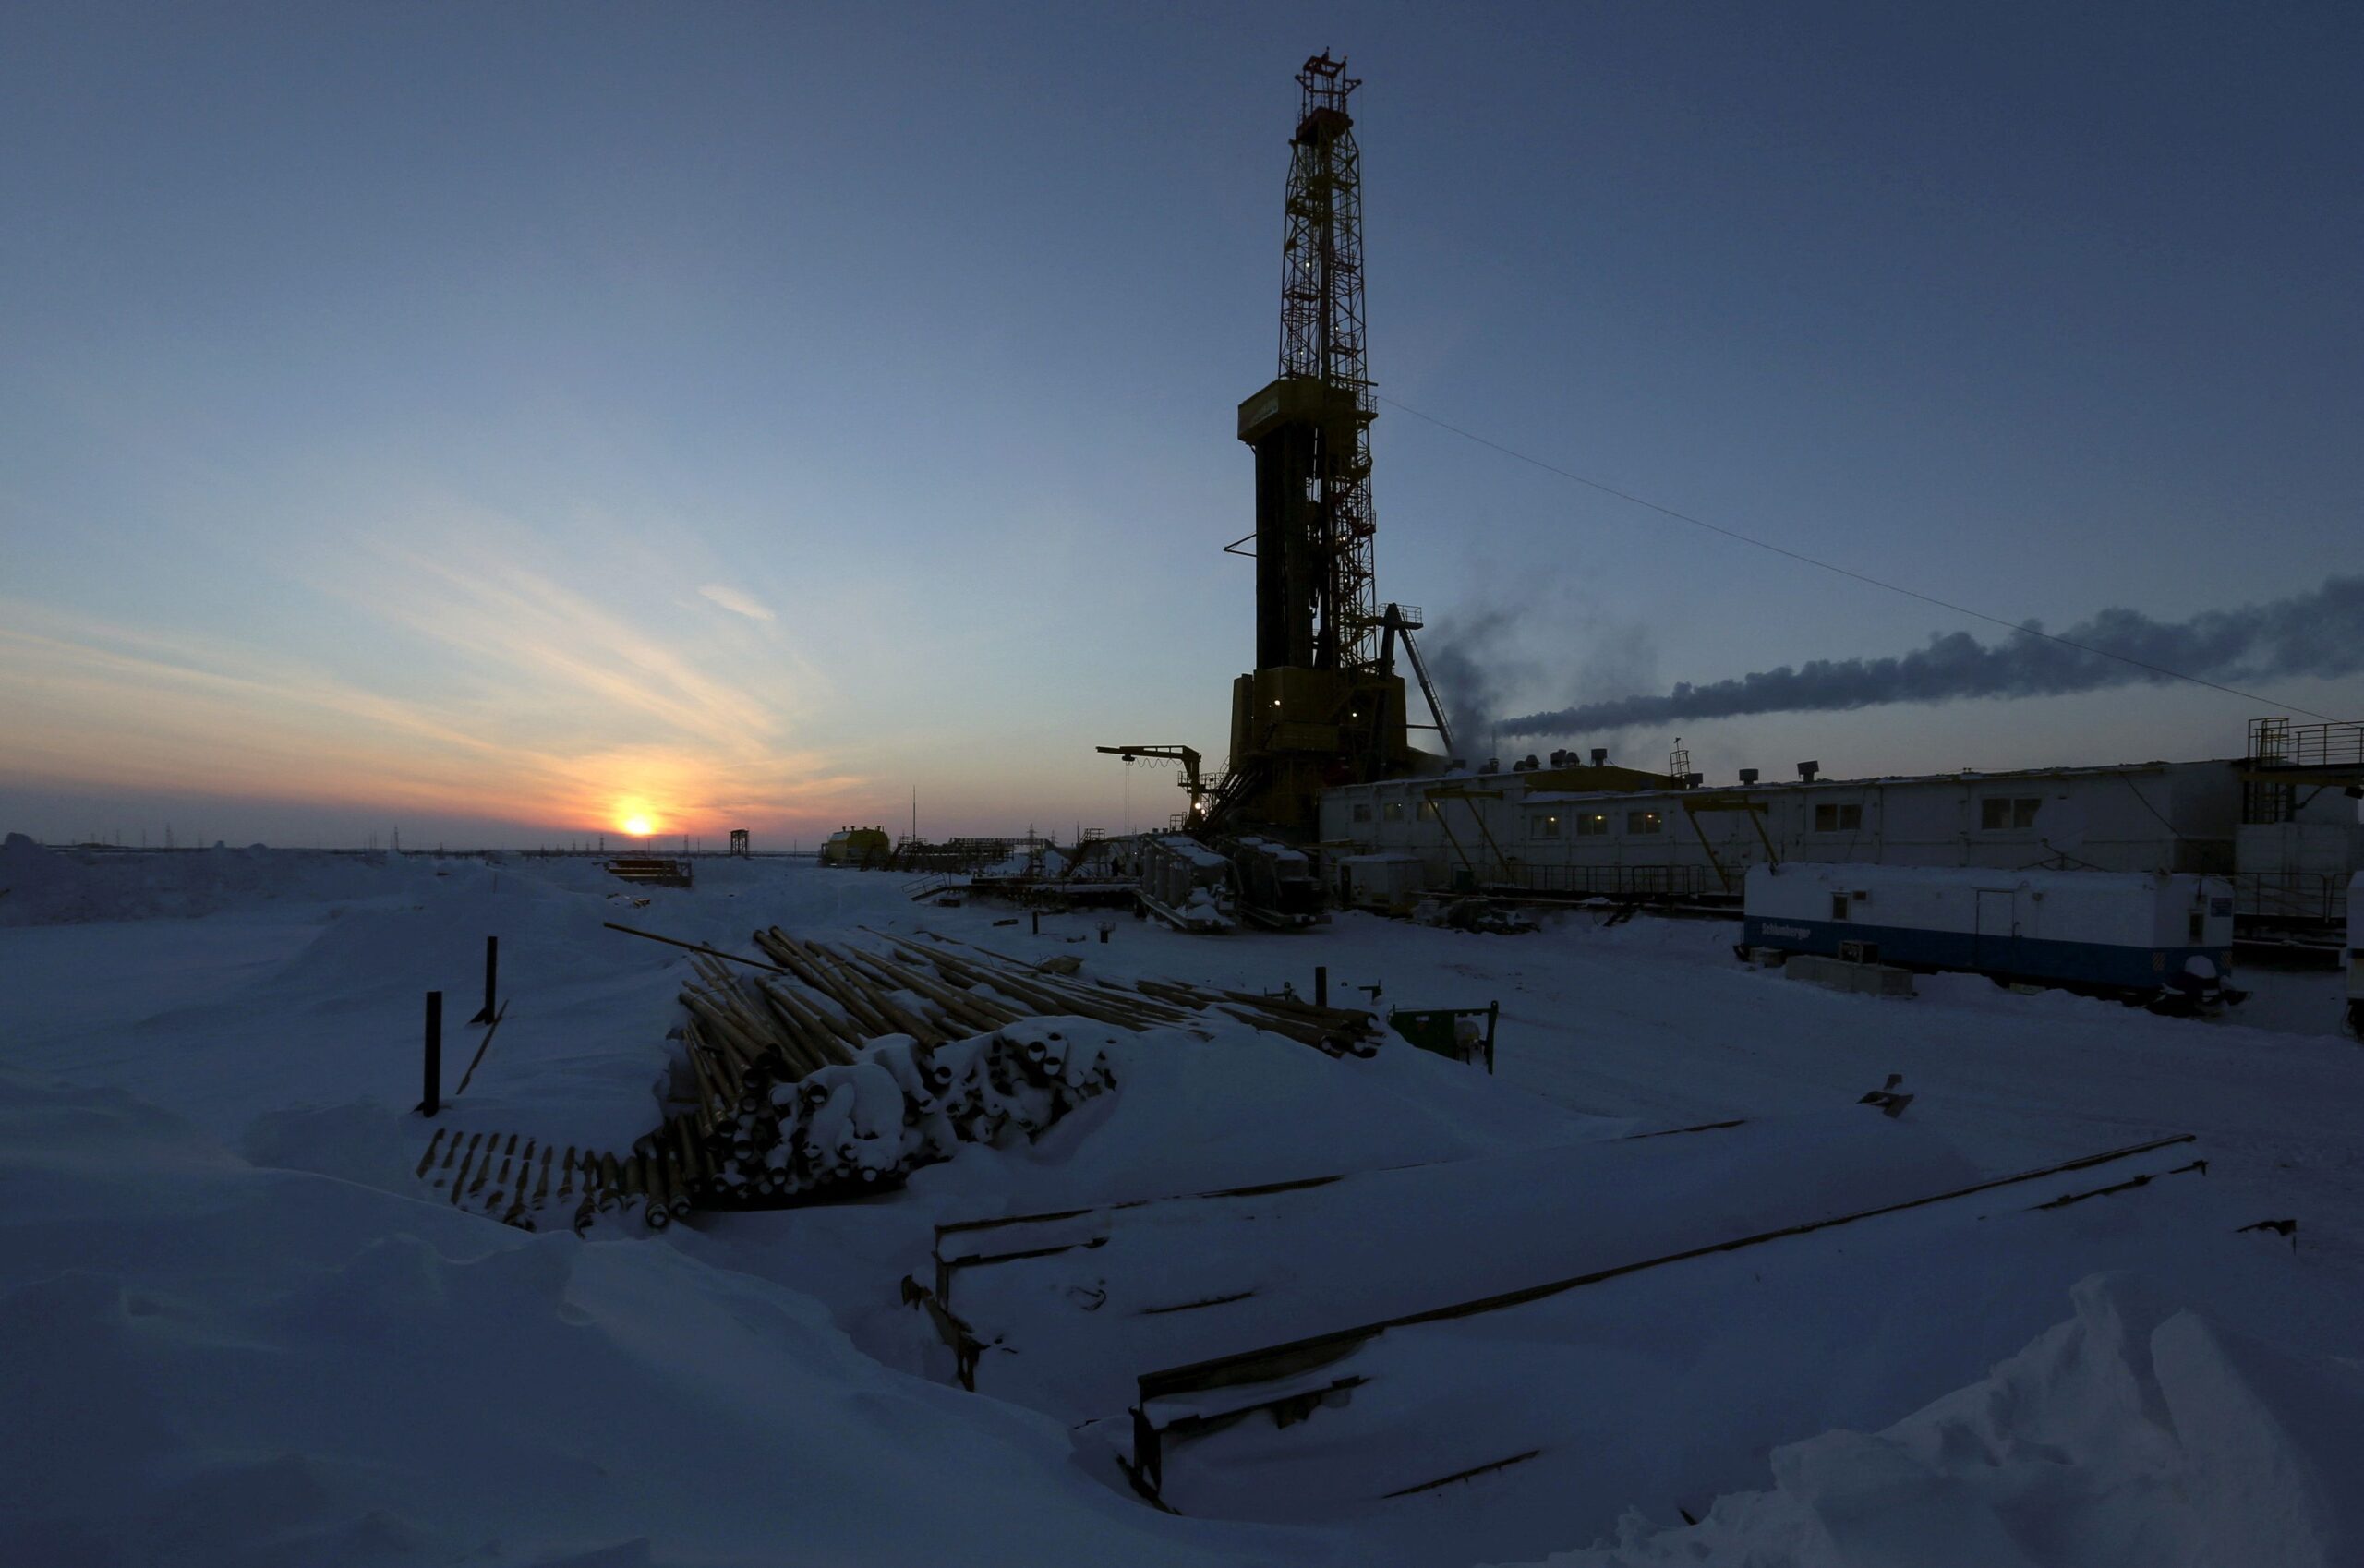 Russian oil trade in disarray over sanctions as prices blast through $100 per barrel